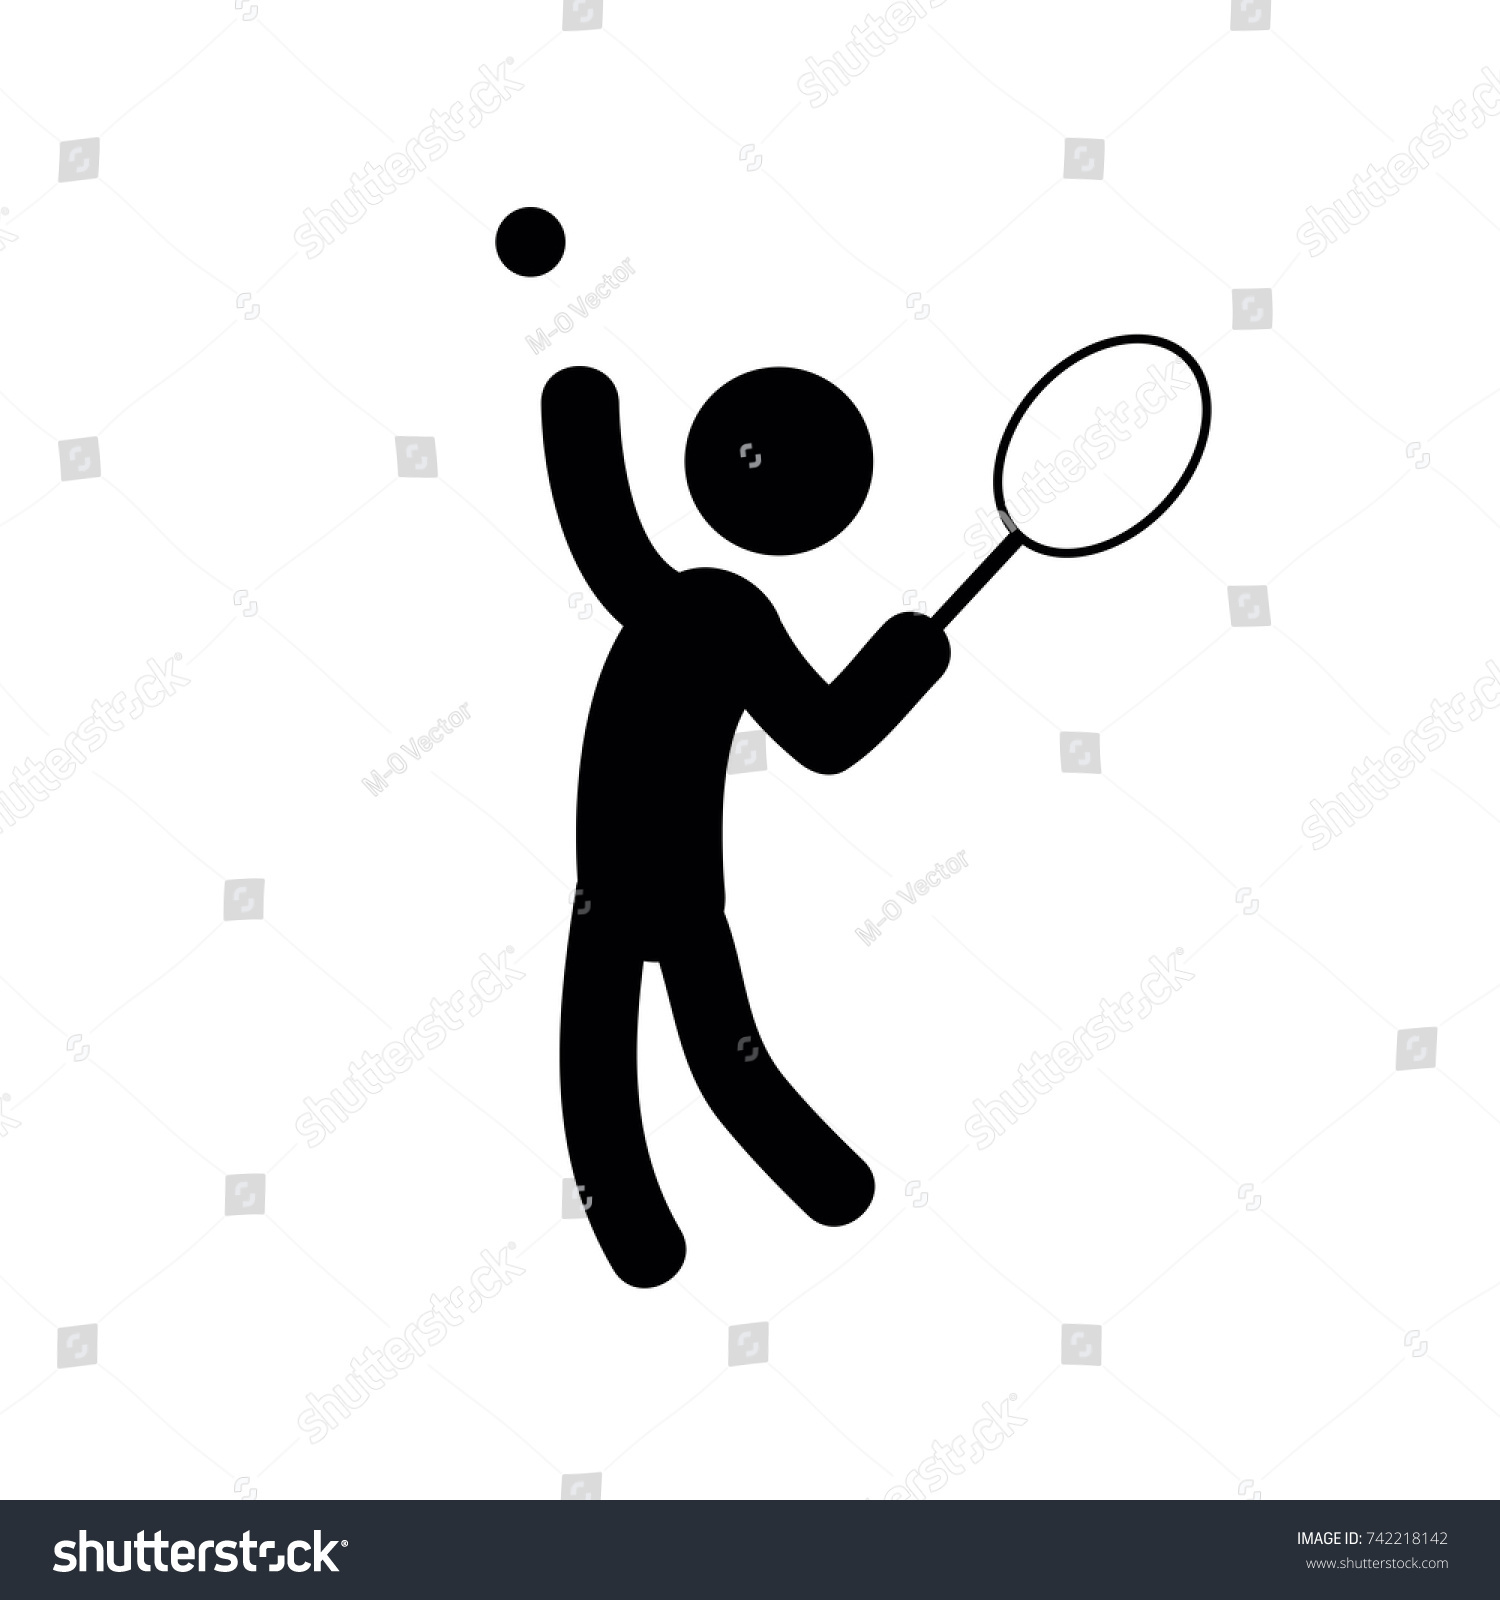 Tennis player silhouette hitting the ball with a racket Icons 